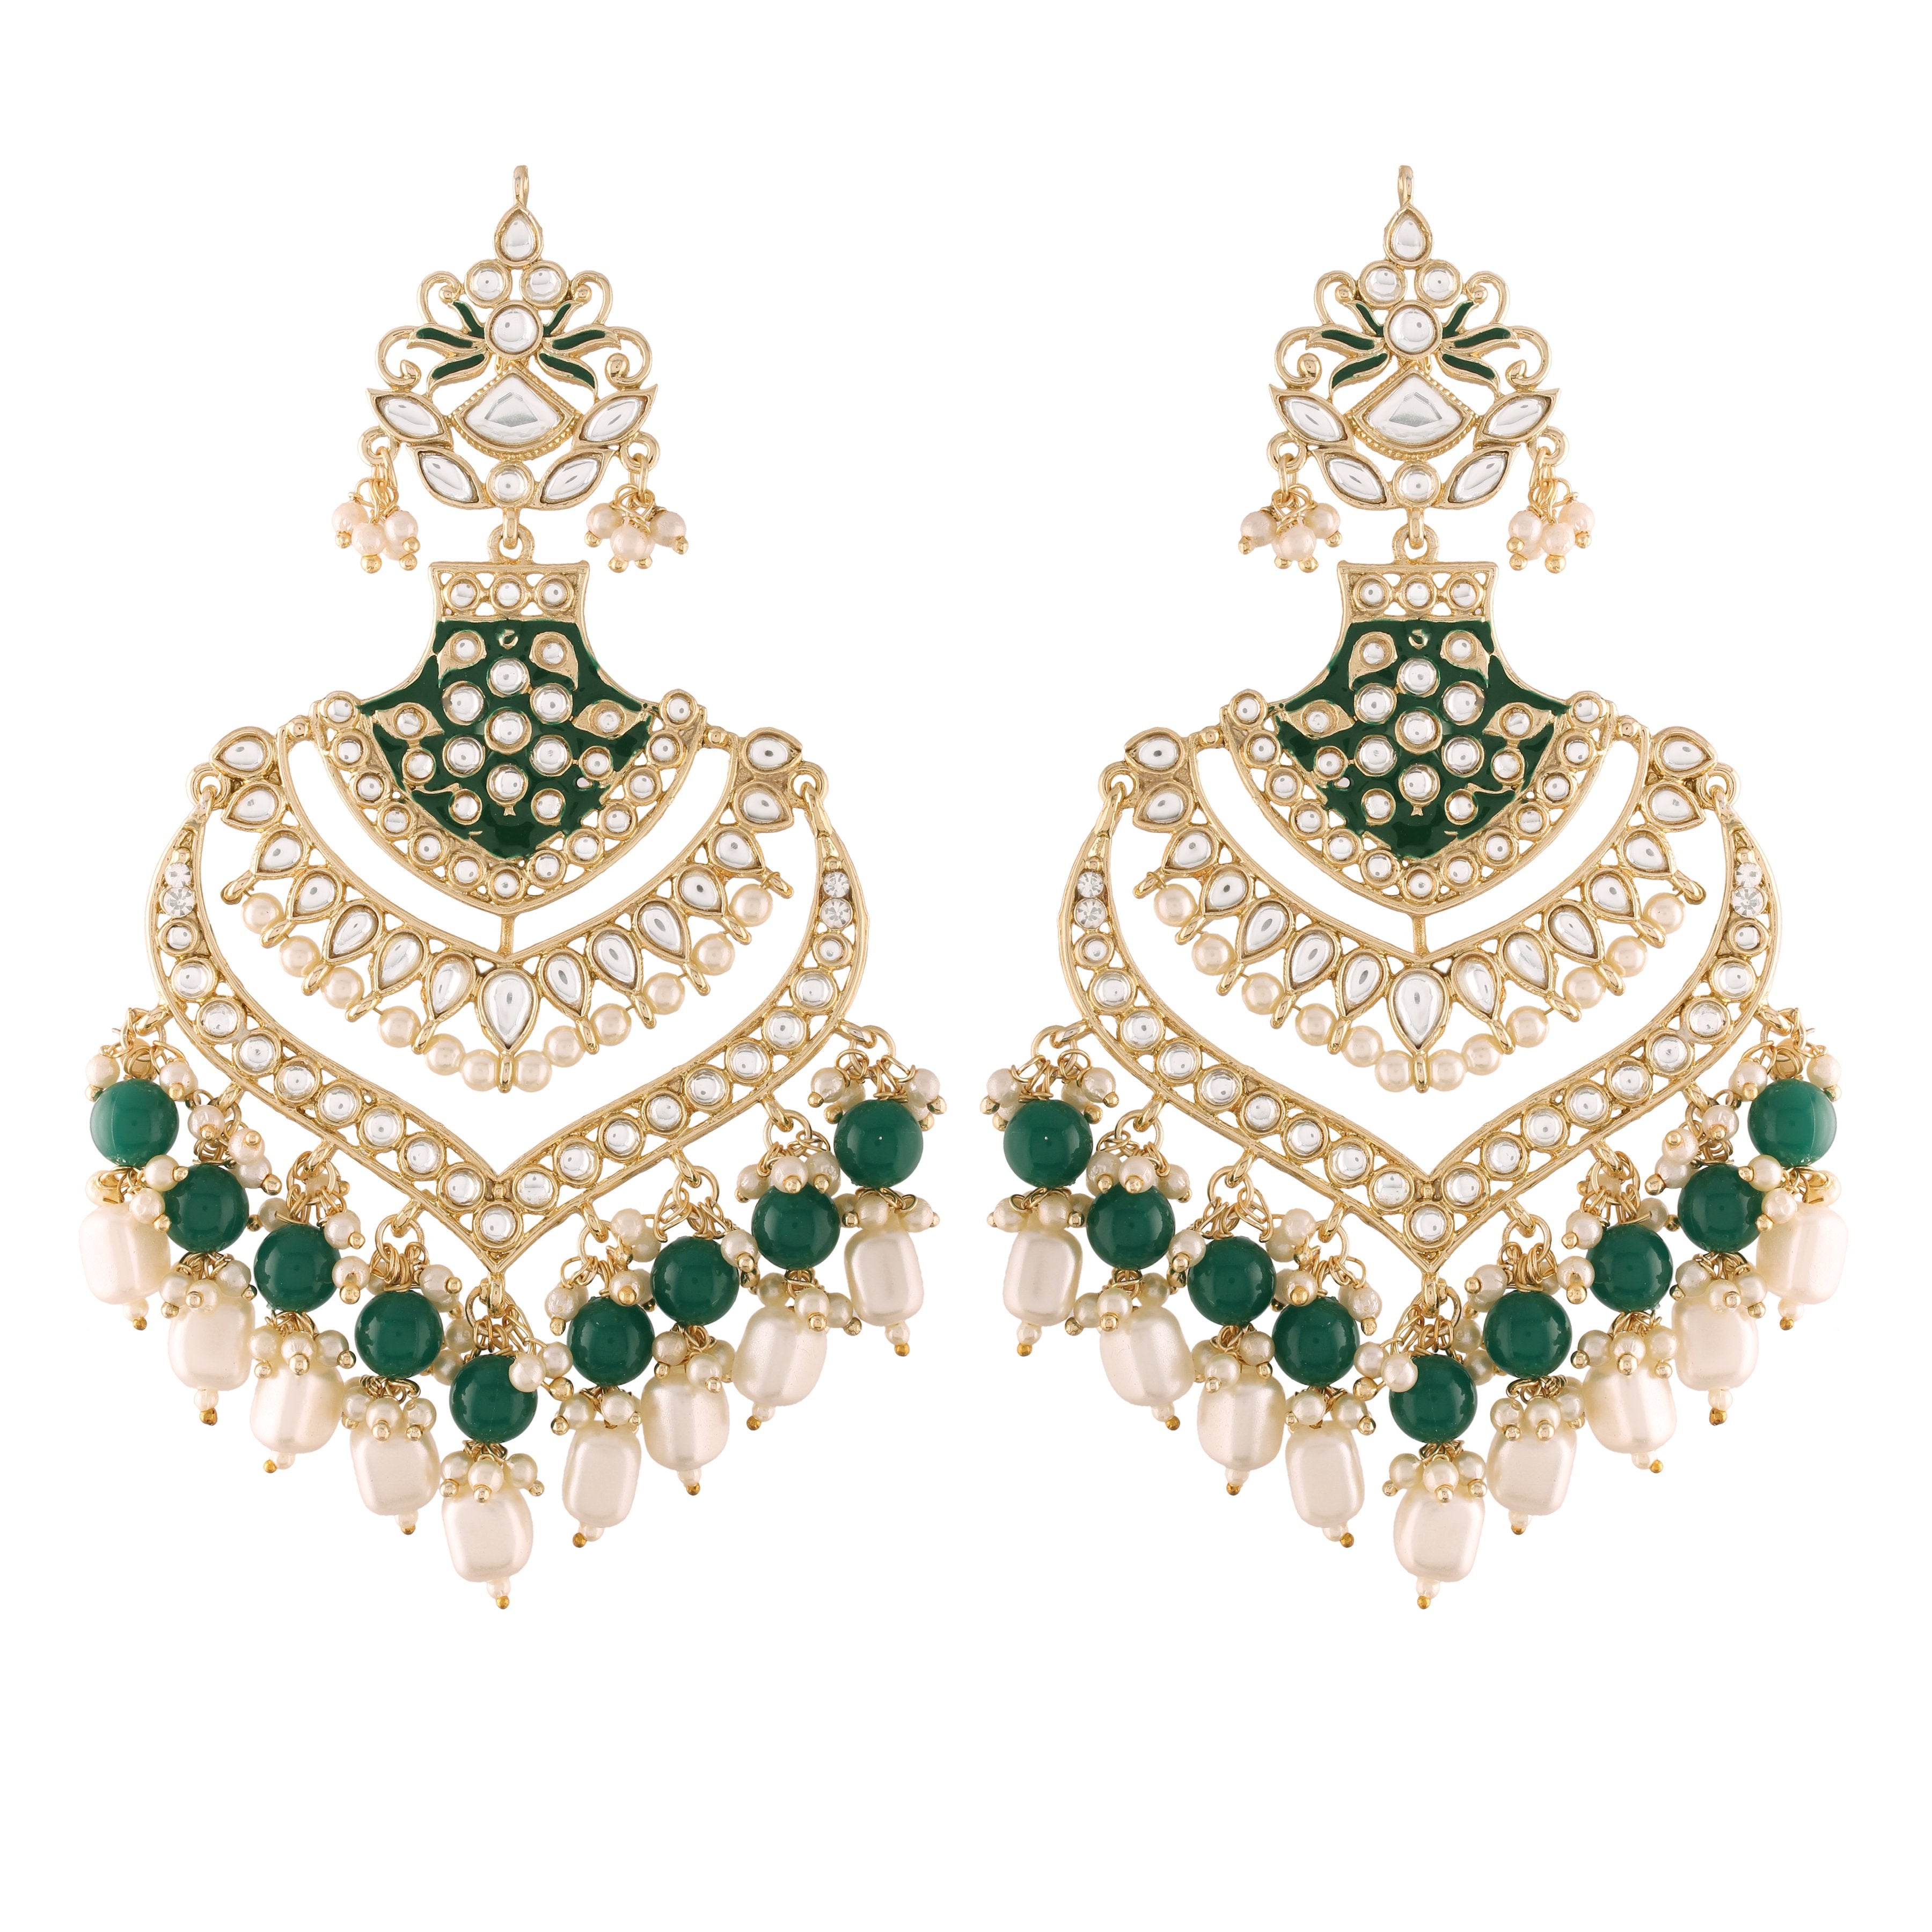 Women Golden and Green Kundan and Beads Earrings by I Jewels (1 Pc Set)